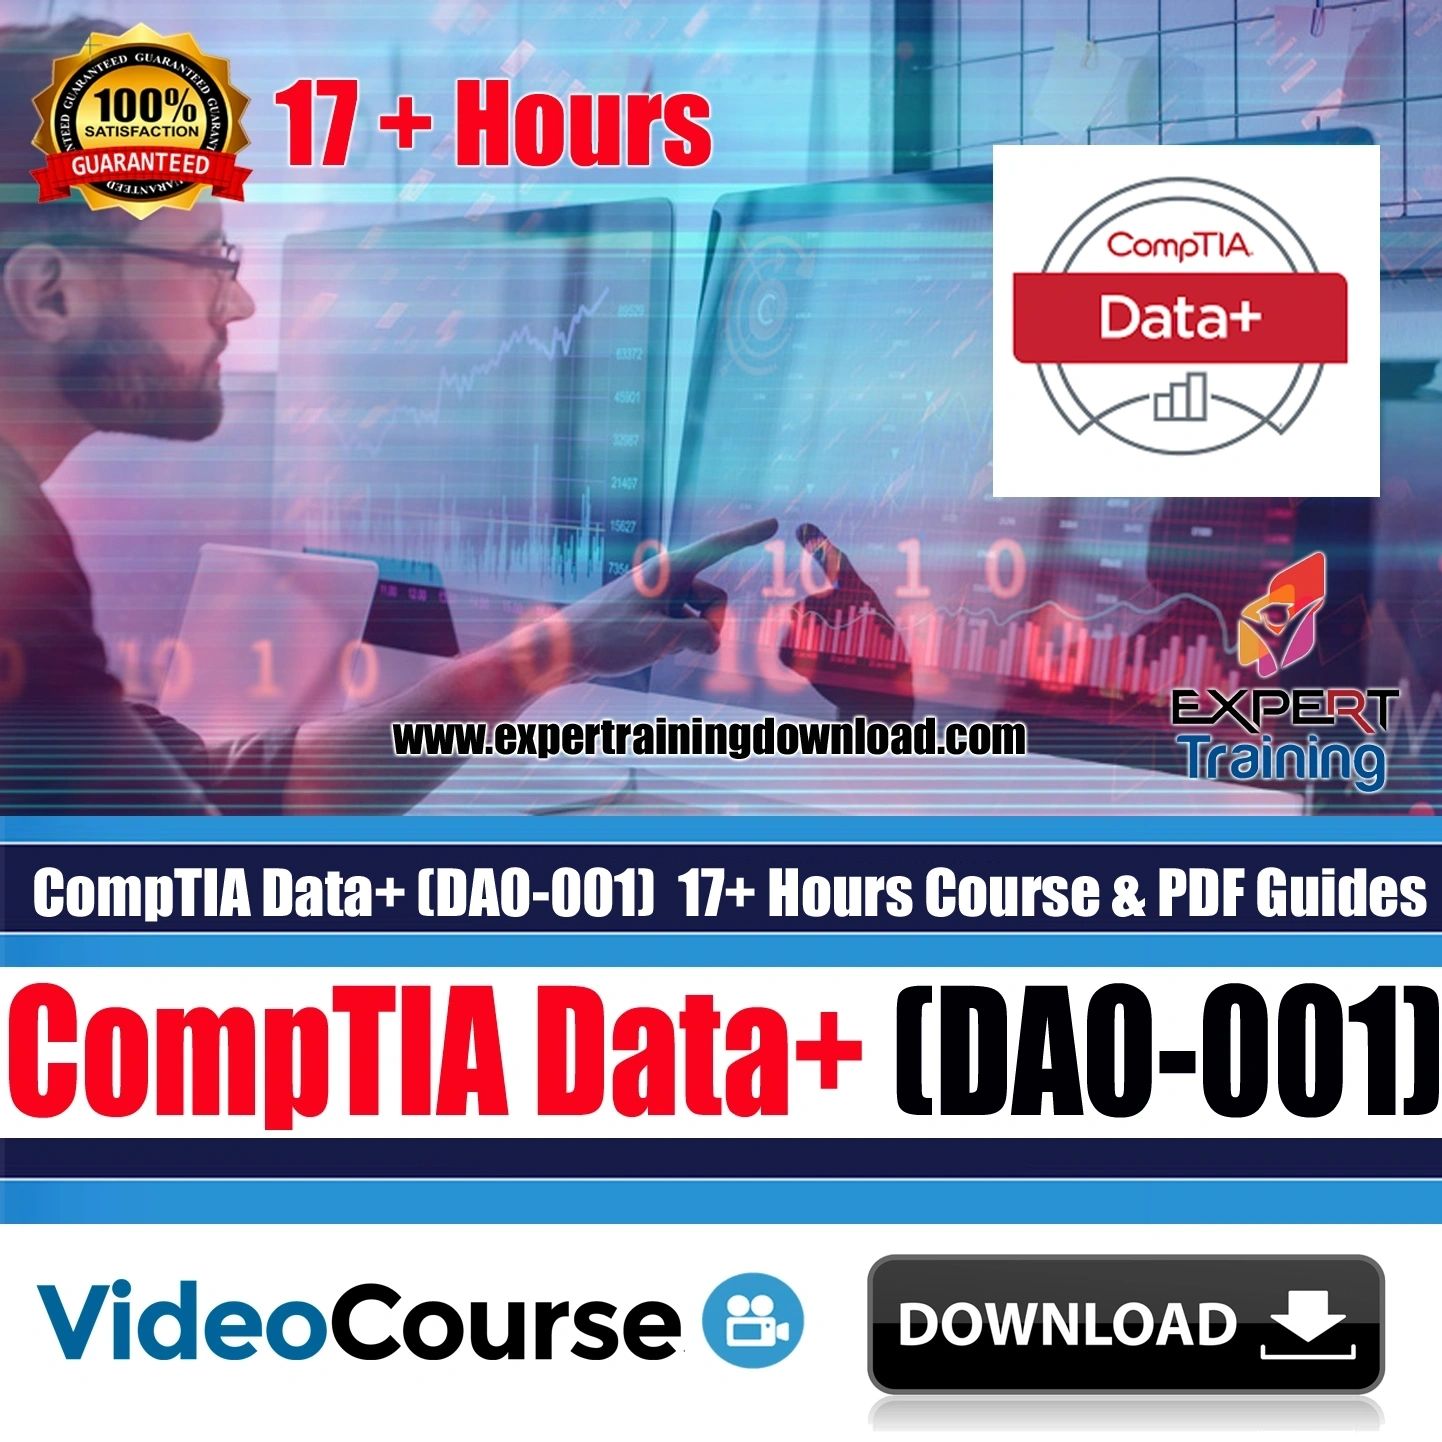 CompTIA Data+ (DA0-001) 17+ Hours Course & PDF Guides Practice Tests